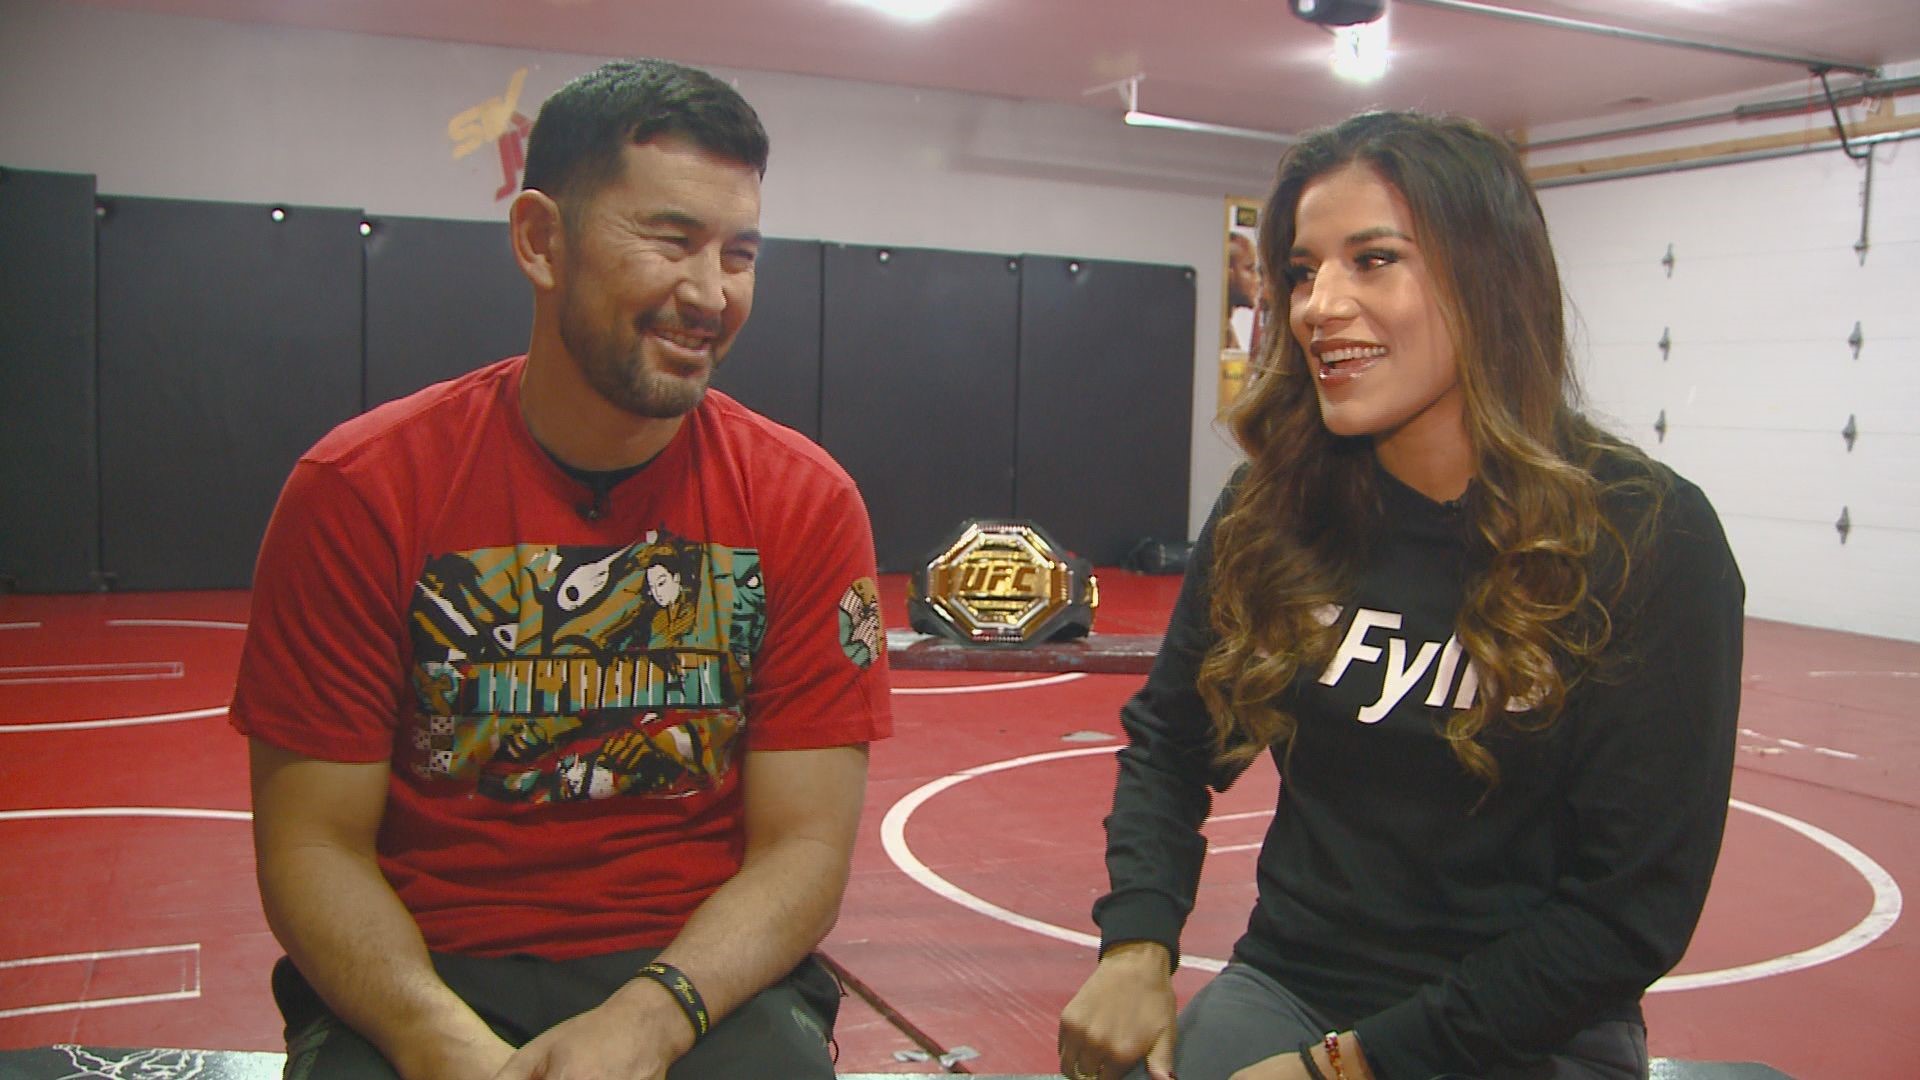 The duo started in a small garage in Spokane and are now on top of the UFC world.